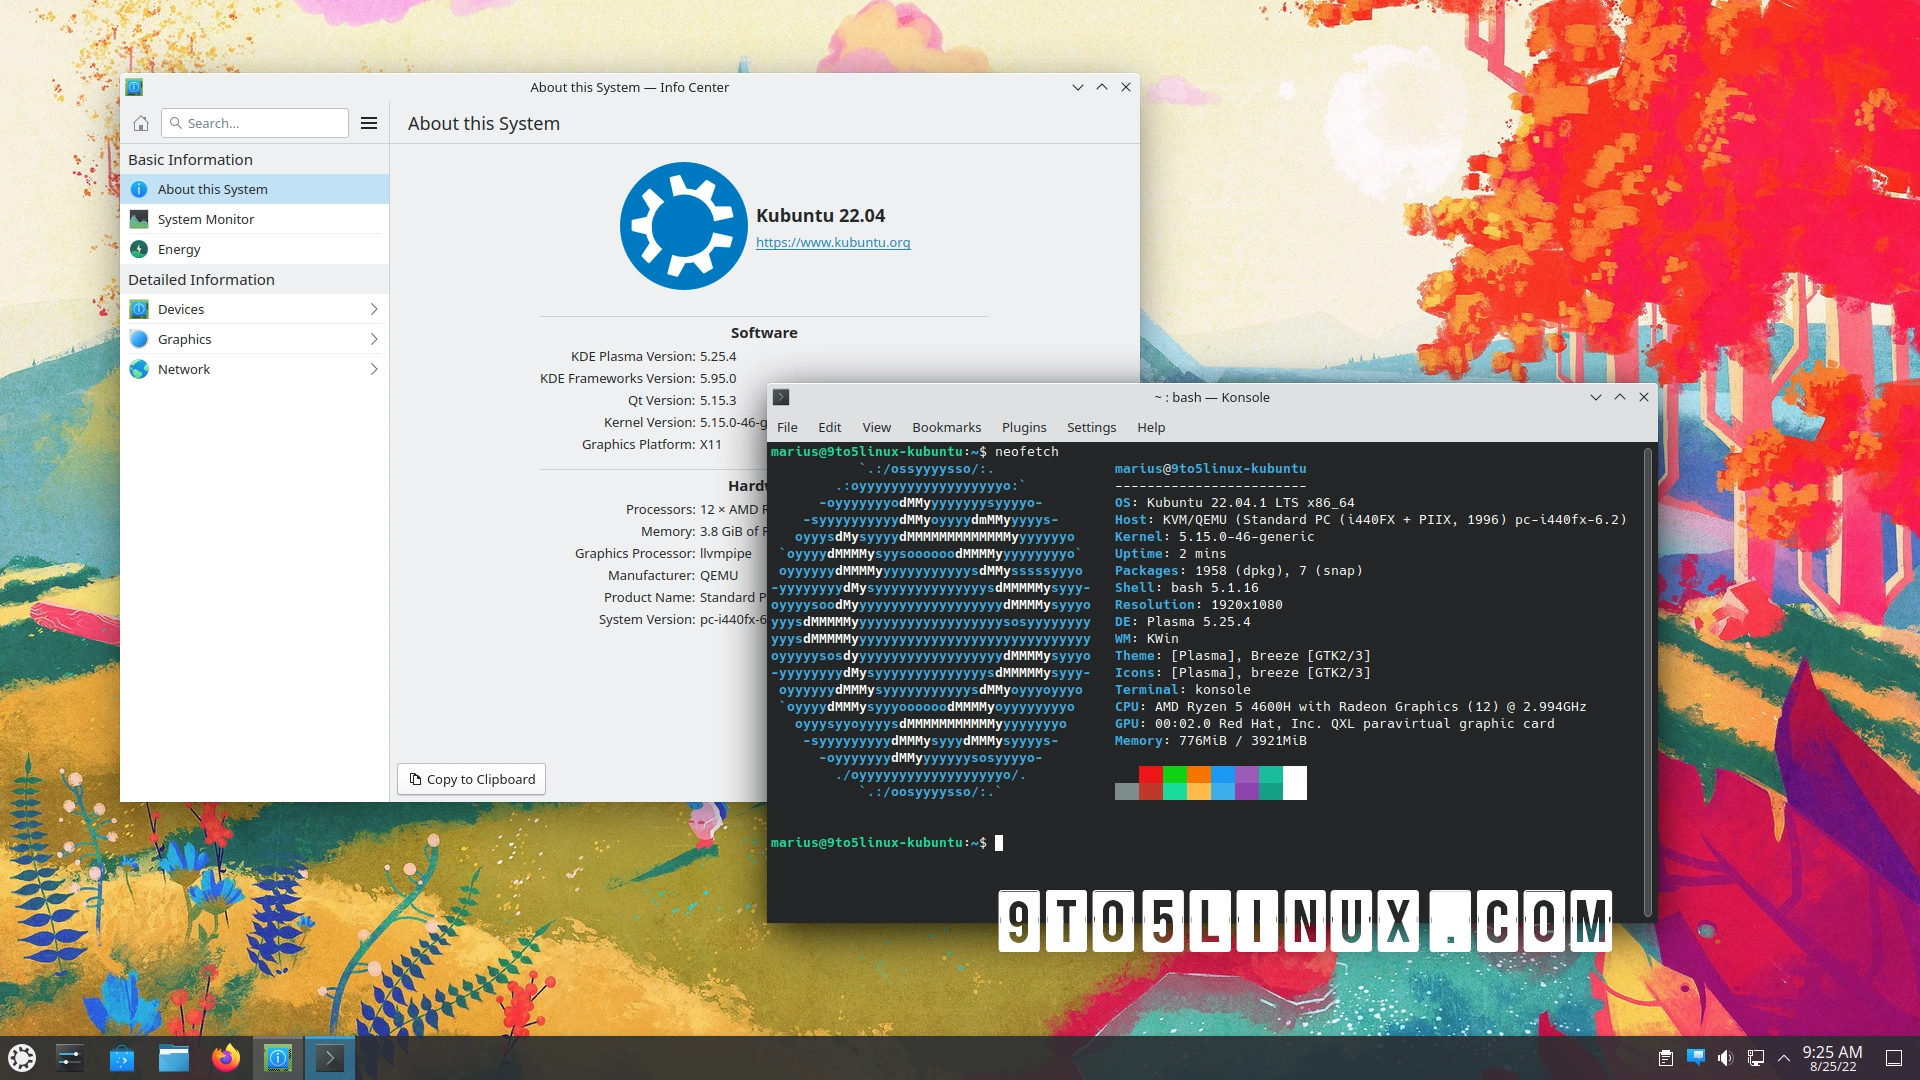 You Can Now Install KDE Plasma 5.25 on Kubuntu 22.04 LTS, Here’s How